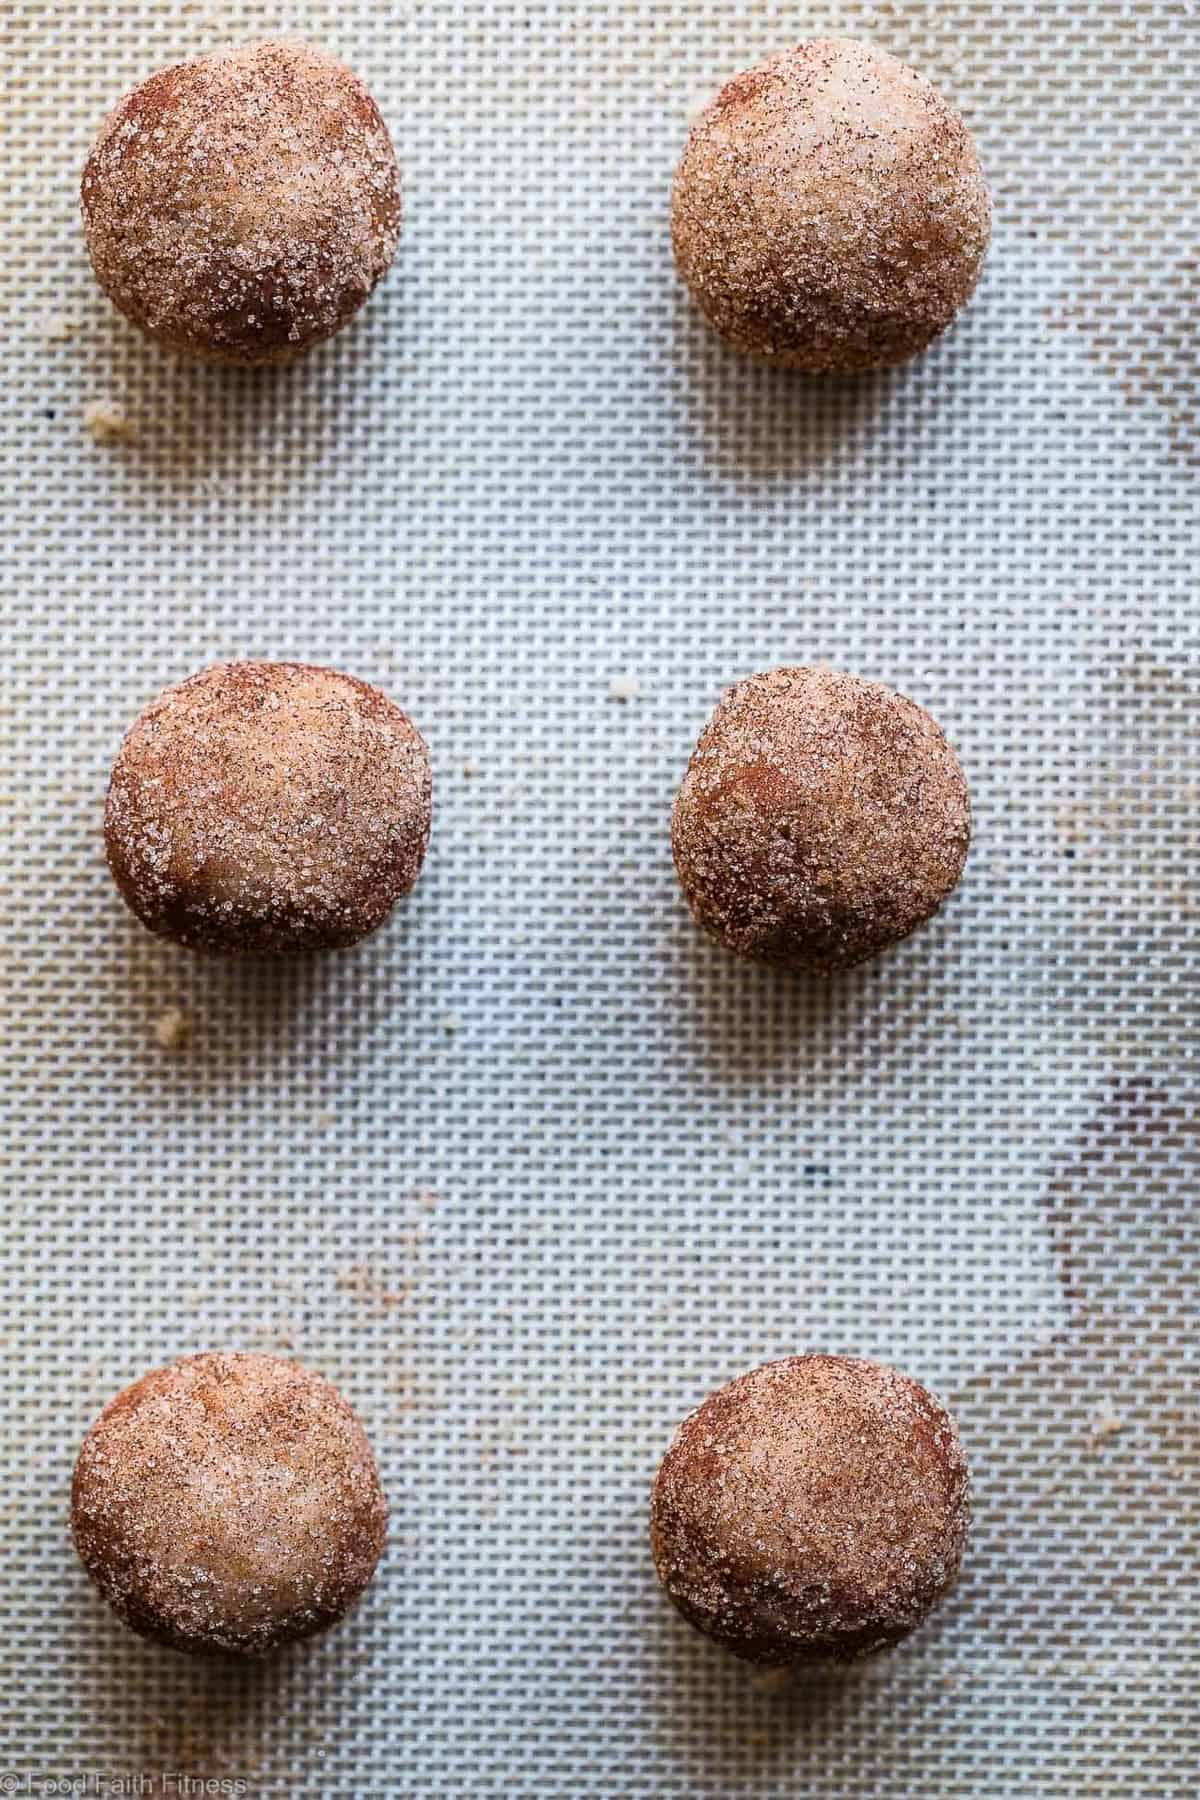 Gluten Free Vegan Snickerdoodles - These EASY, egg, dairy and gluten free snickerdoodles are perfectly soft, chewy and spicy-sweet! Made from simple, pantry-essential ingredients, only 120 calories and SO tasty! | Foodfaithfitness | #Glutenfree #Vegan #Healthy #Dairyfree #Eggfree